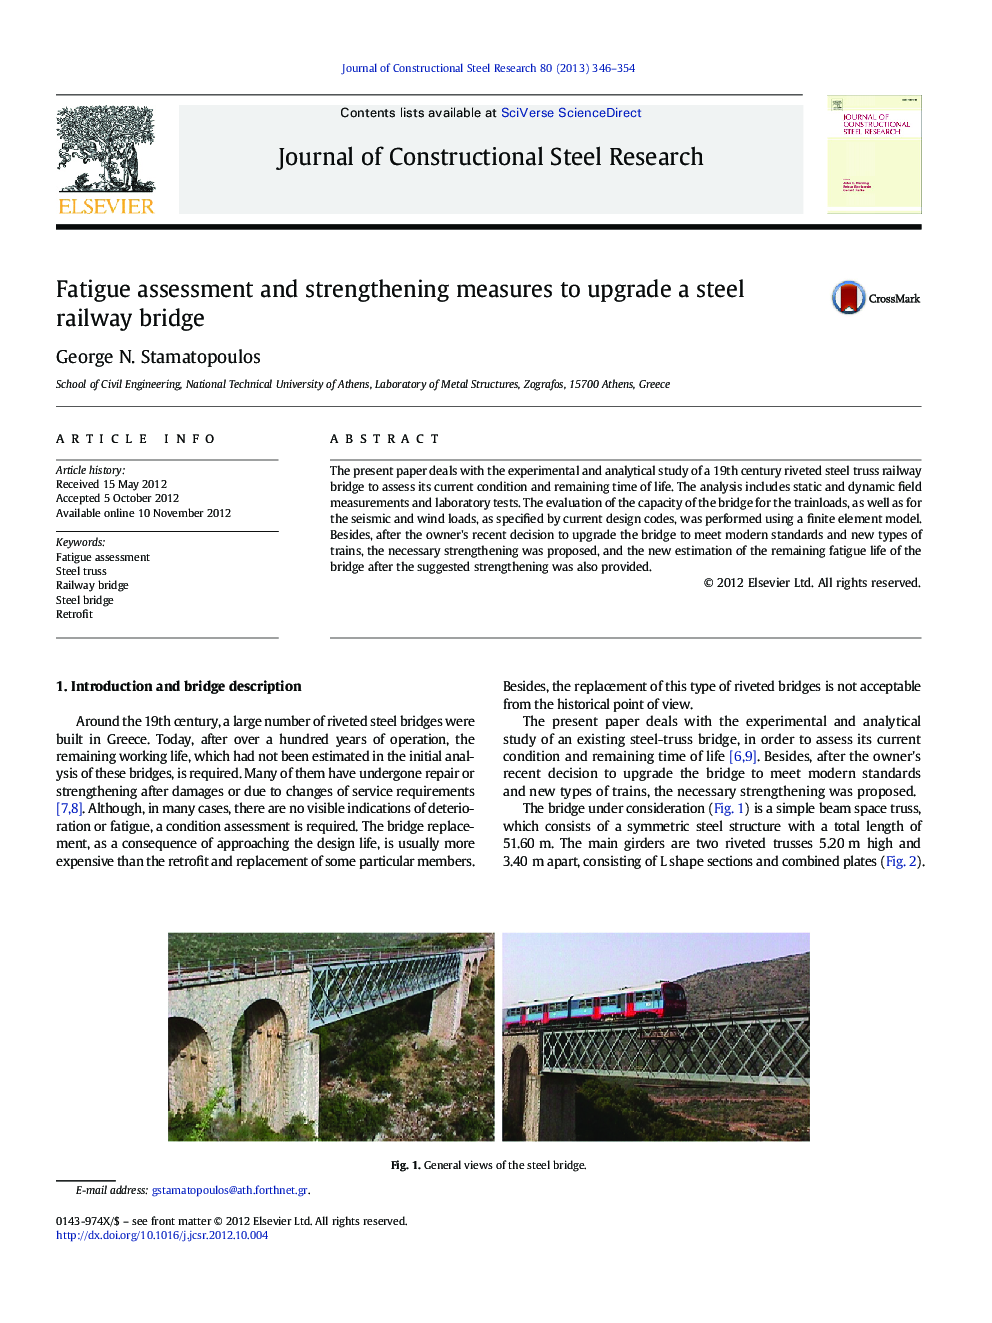 Fatigue assessment and strengthening measures to upgrade a steel railway bridge